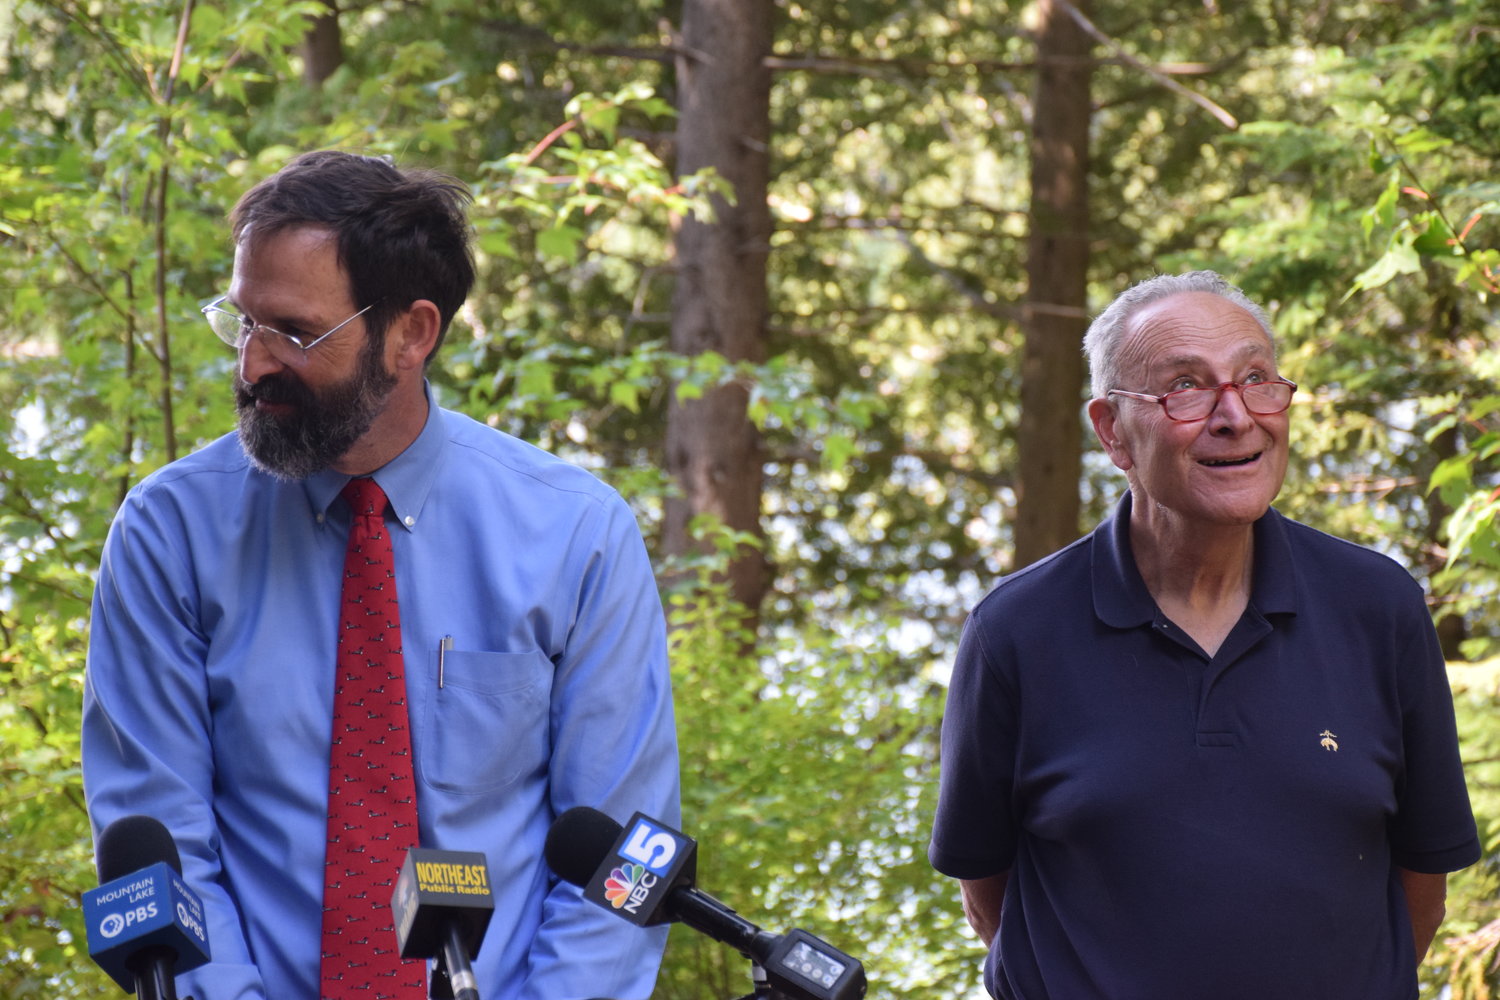 Adirondack Council Executive Director Willie Janeway, left, discusses the Inflation Reduction Act of 2022 as U.S. Sen. Chuck Schumer smiles at a hawk in the treetops at Heart Lake in Lake Placid on Monday.  (AP Photo/Adirondack Daily Enterprise)